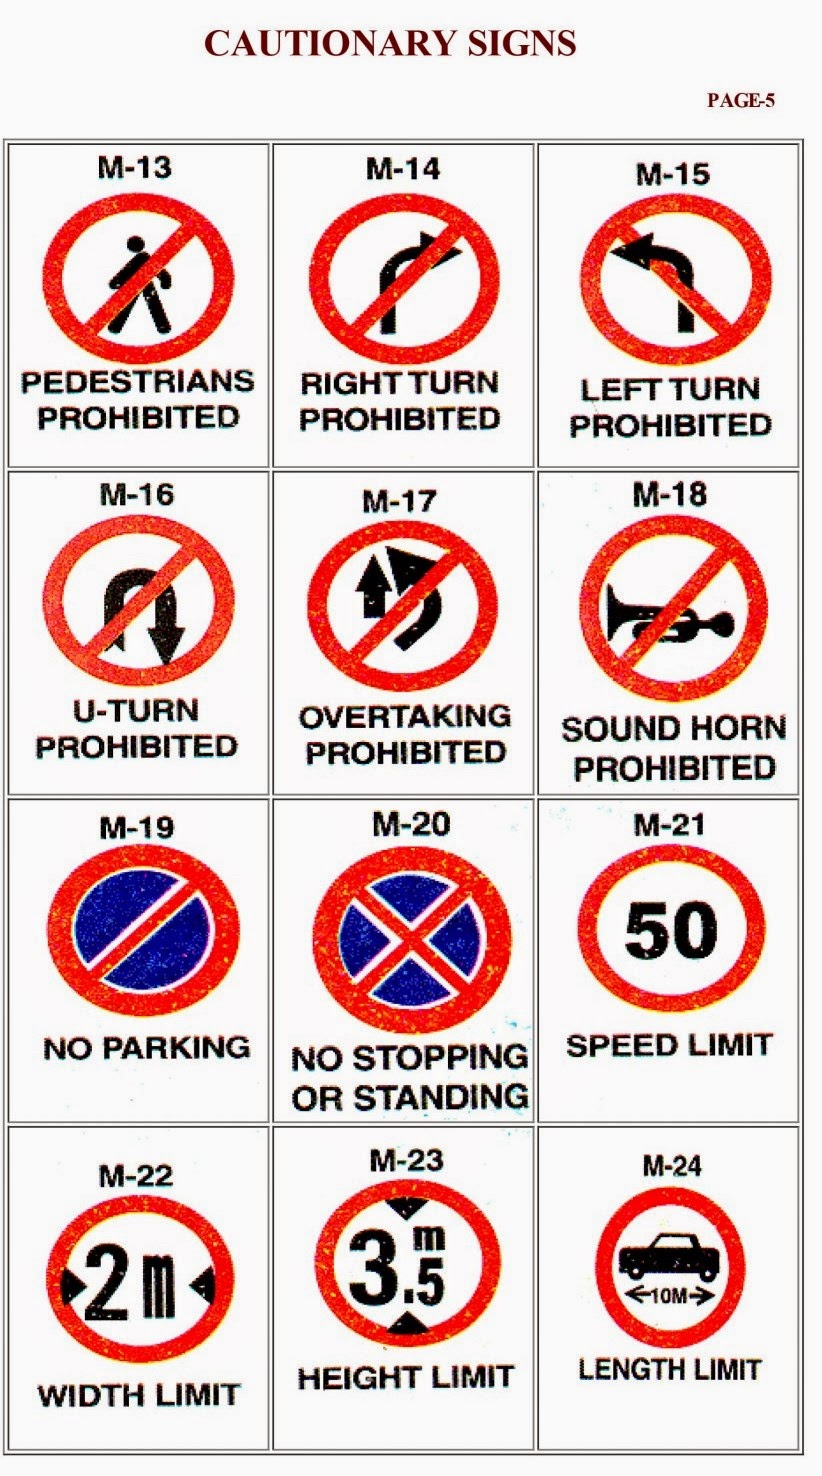 Road Signs Chart